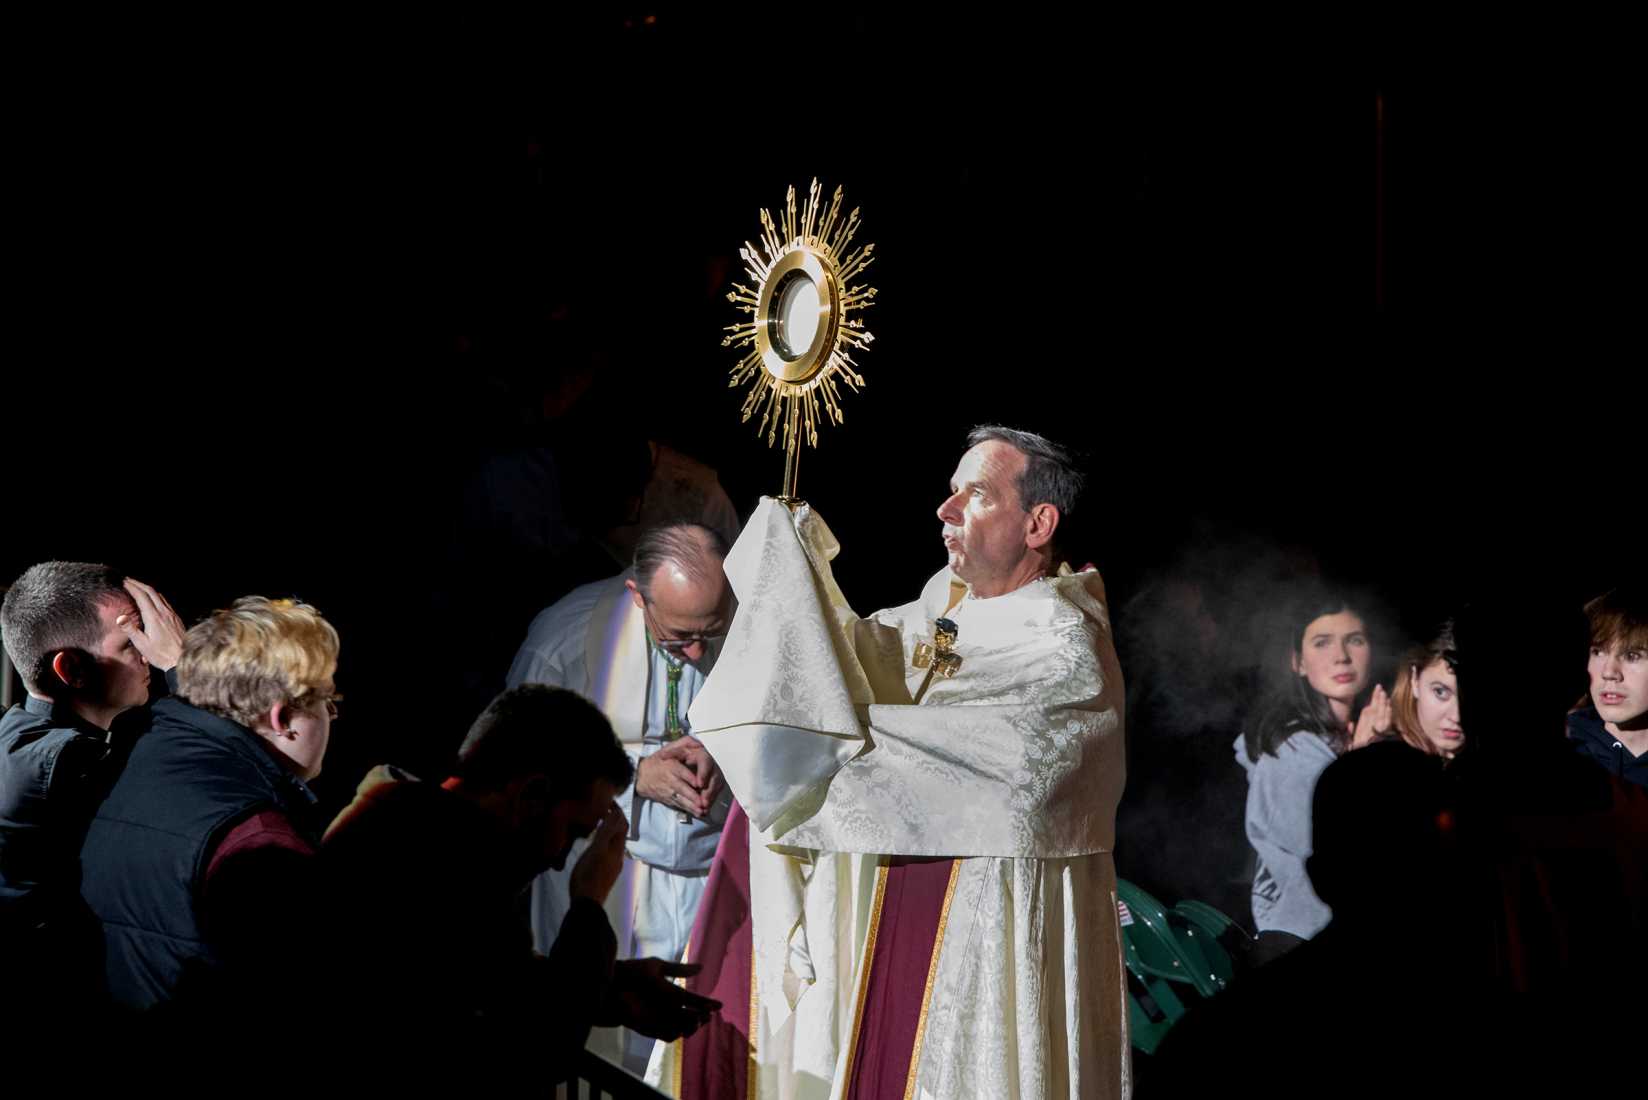 Bishop Burbidge holds the monstrance during a Eucharistic procession while people bow their heads in prayer around him